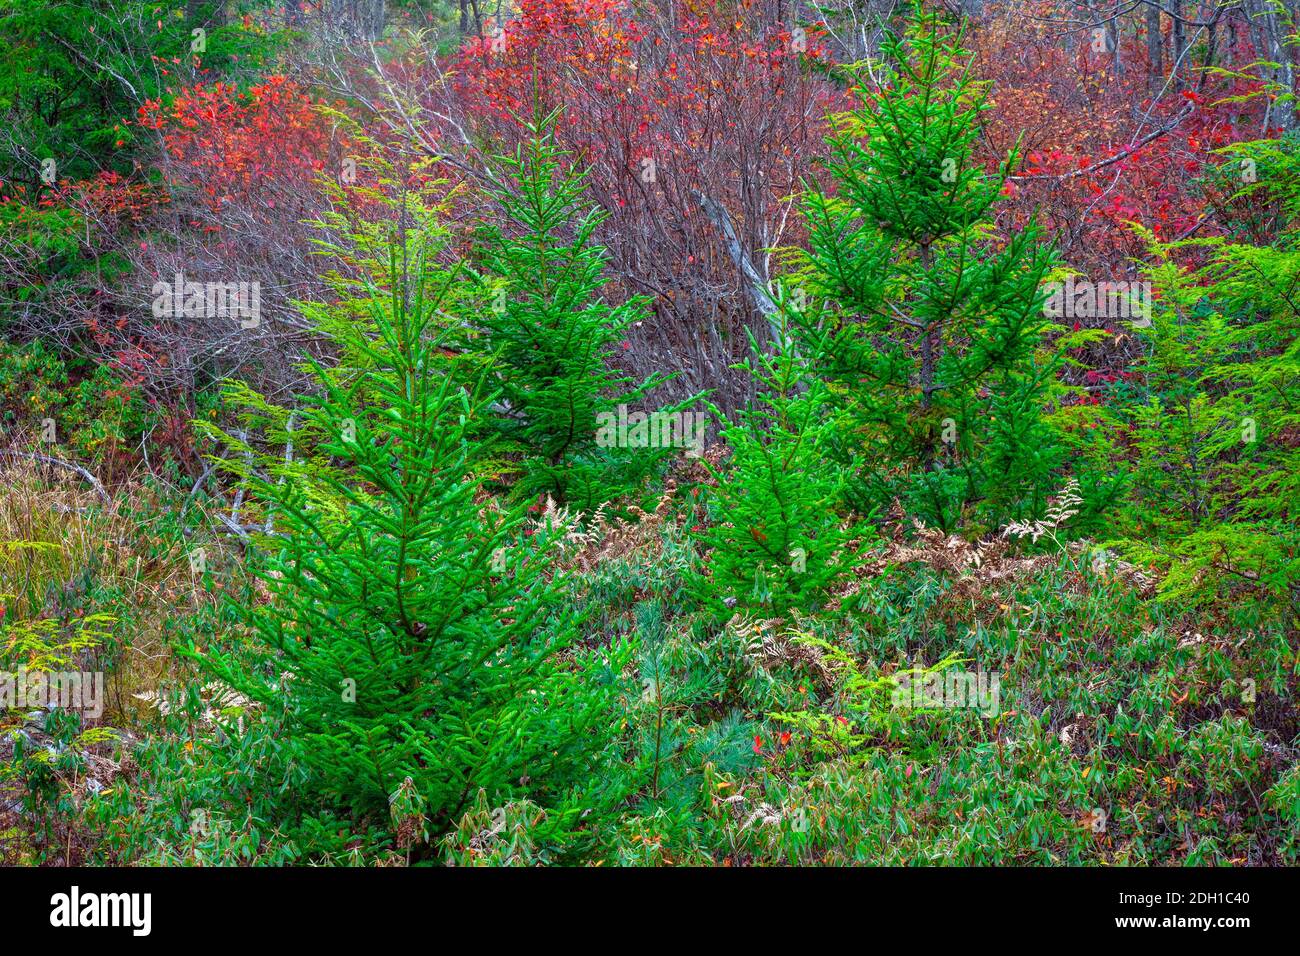 A mixed forest of confiers and deciduous in autumn in Pennsylvania’s Pocono Mountains. Stock Photo